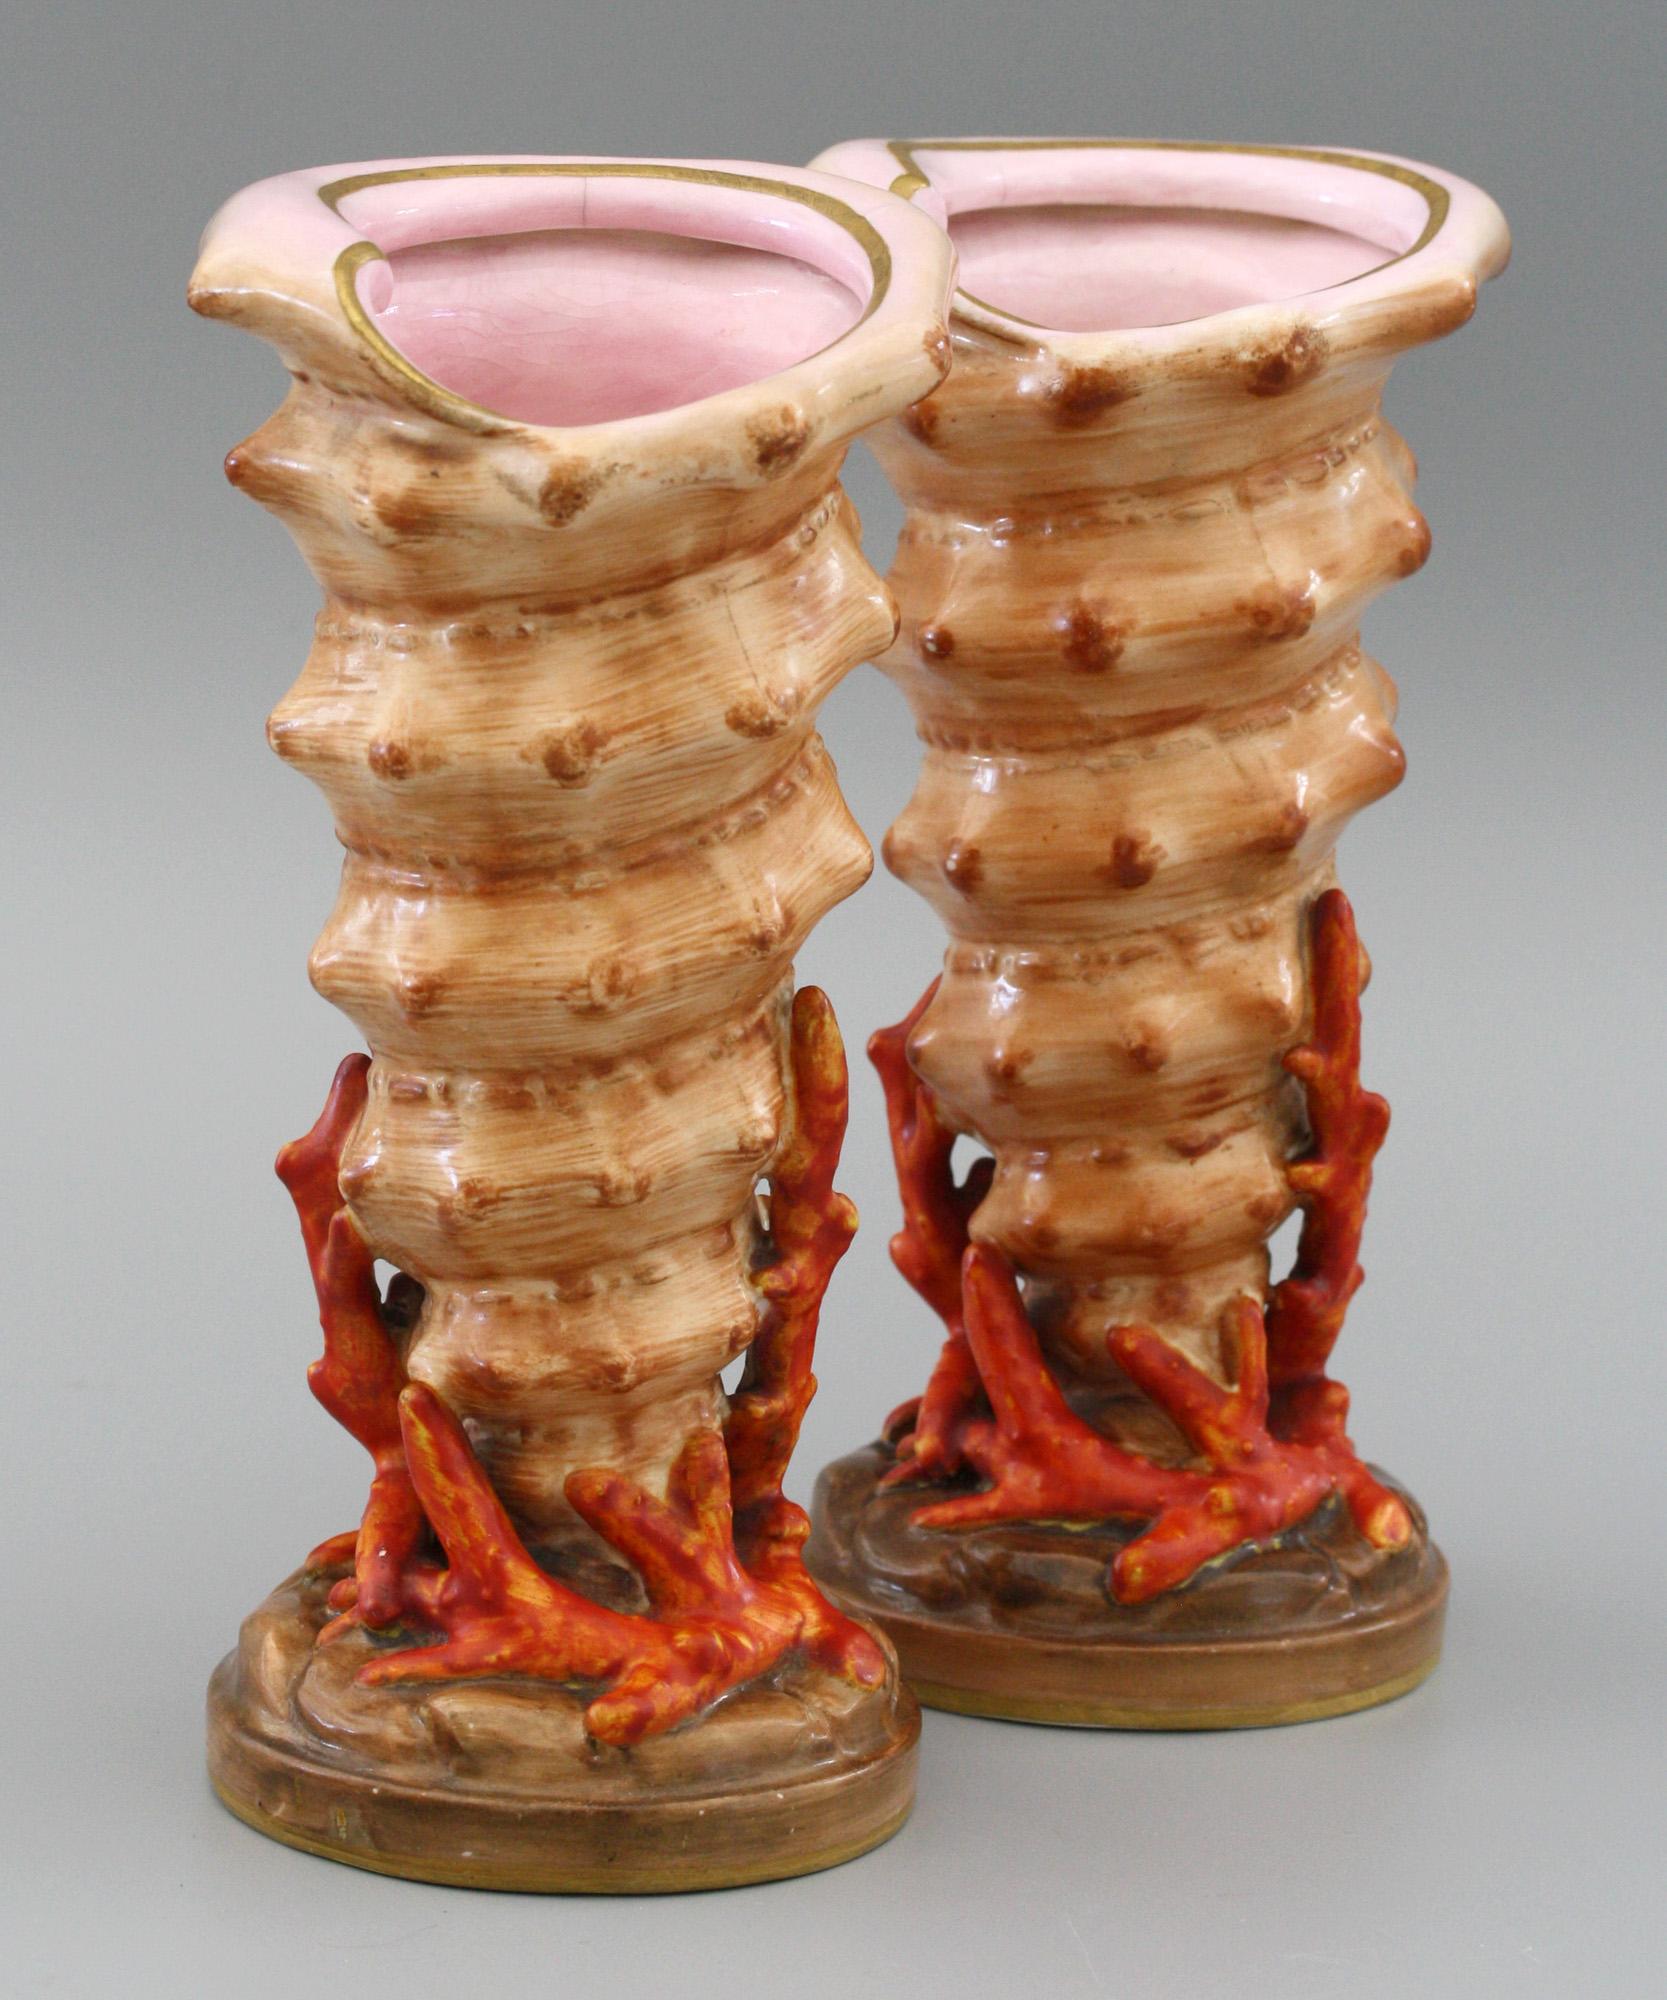 Aesthetic Movement Copeland English Pair of Shell and Coral Porcelain Vases, circa 1870